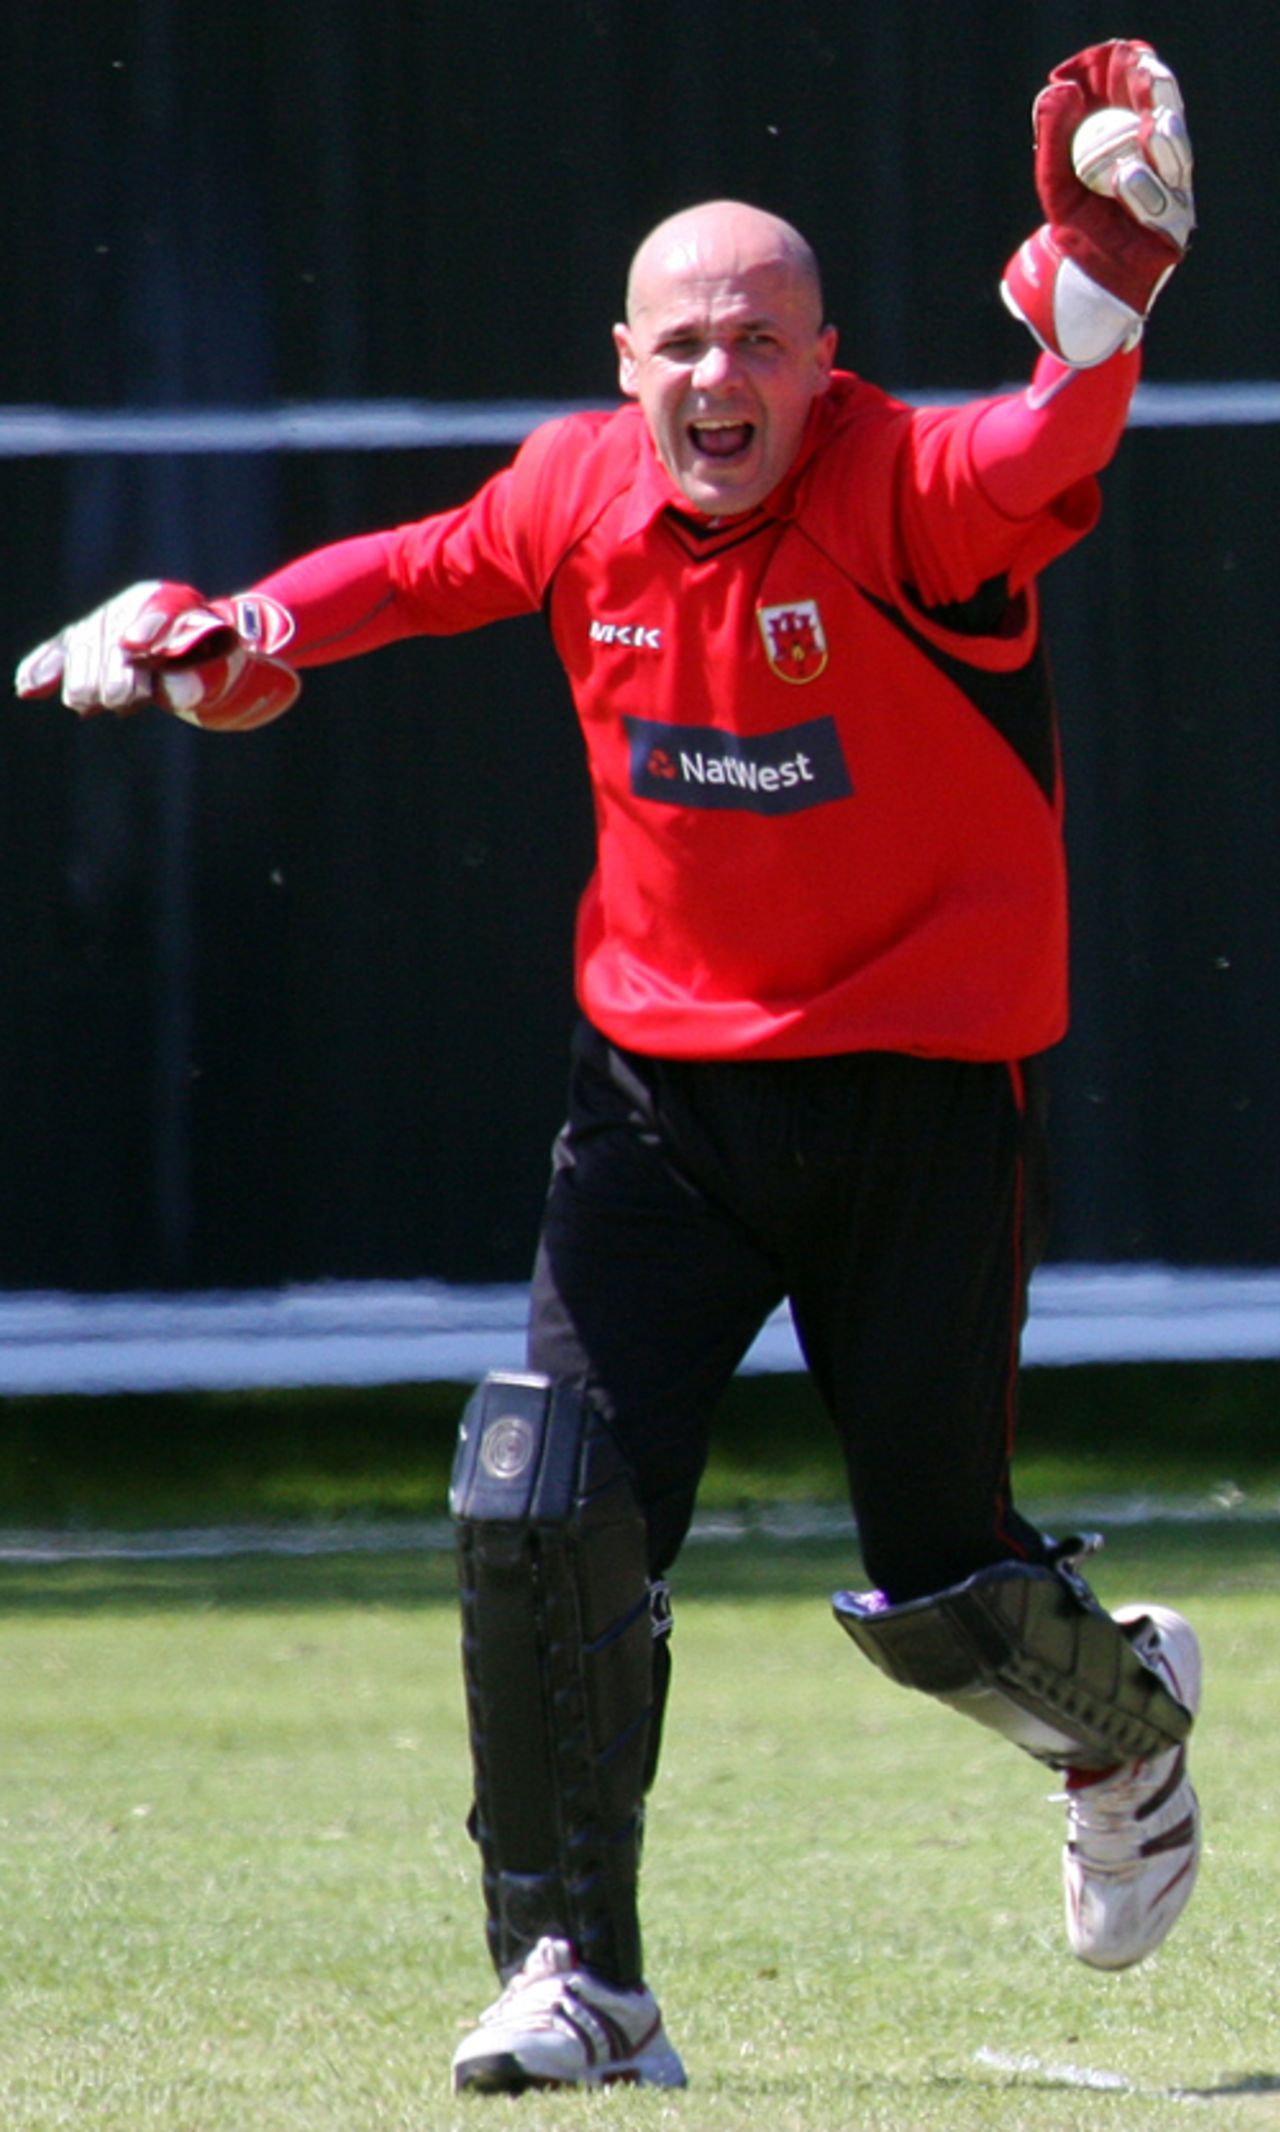 Richard Buzaglo is ecstatic after grabbing onto a catch from Imran Sajjad, Bahrain v Gibraltar, ICC World Cricket League Division 7, Castel, May 19, 2009